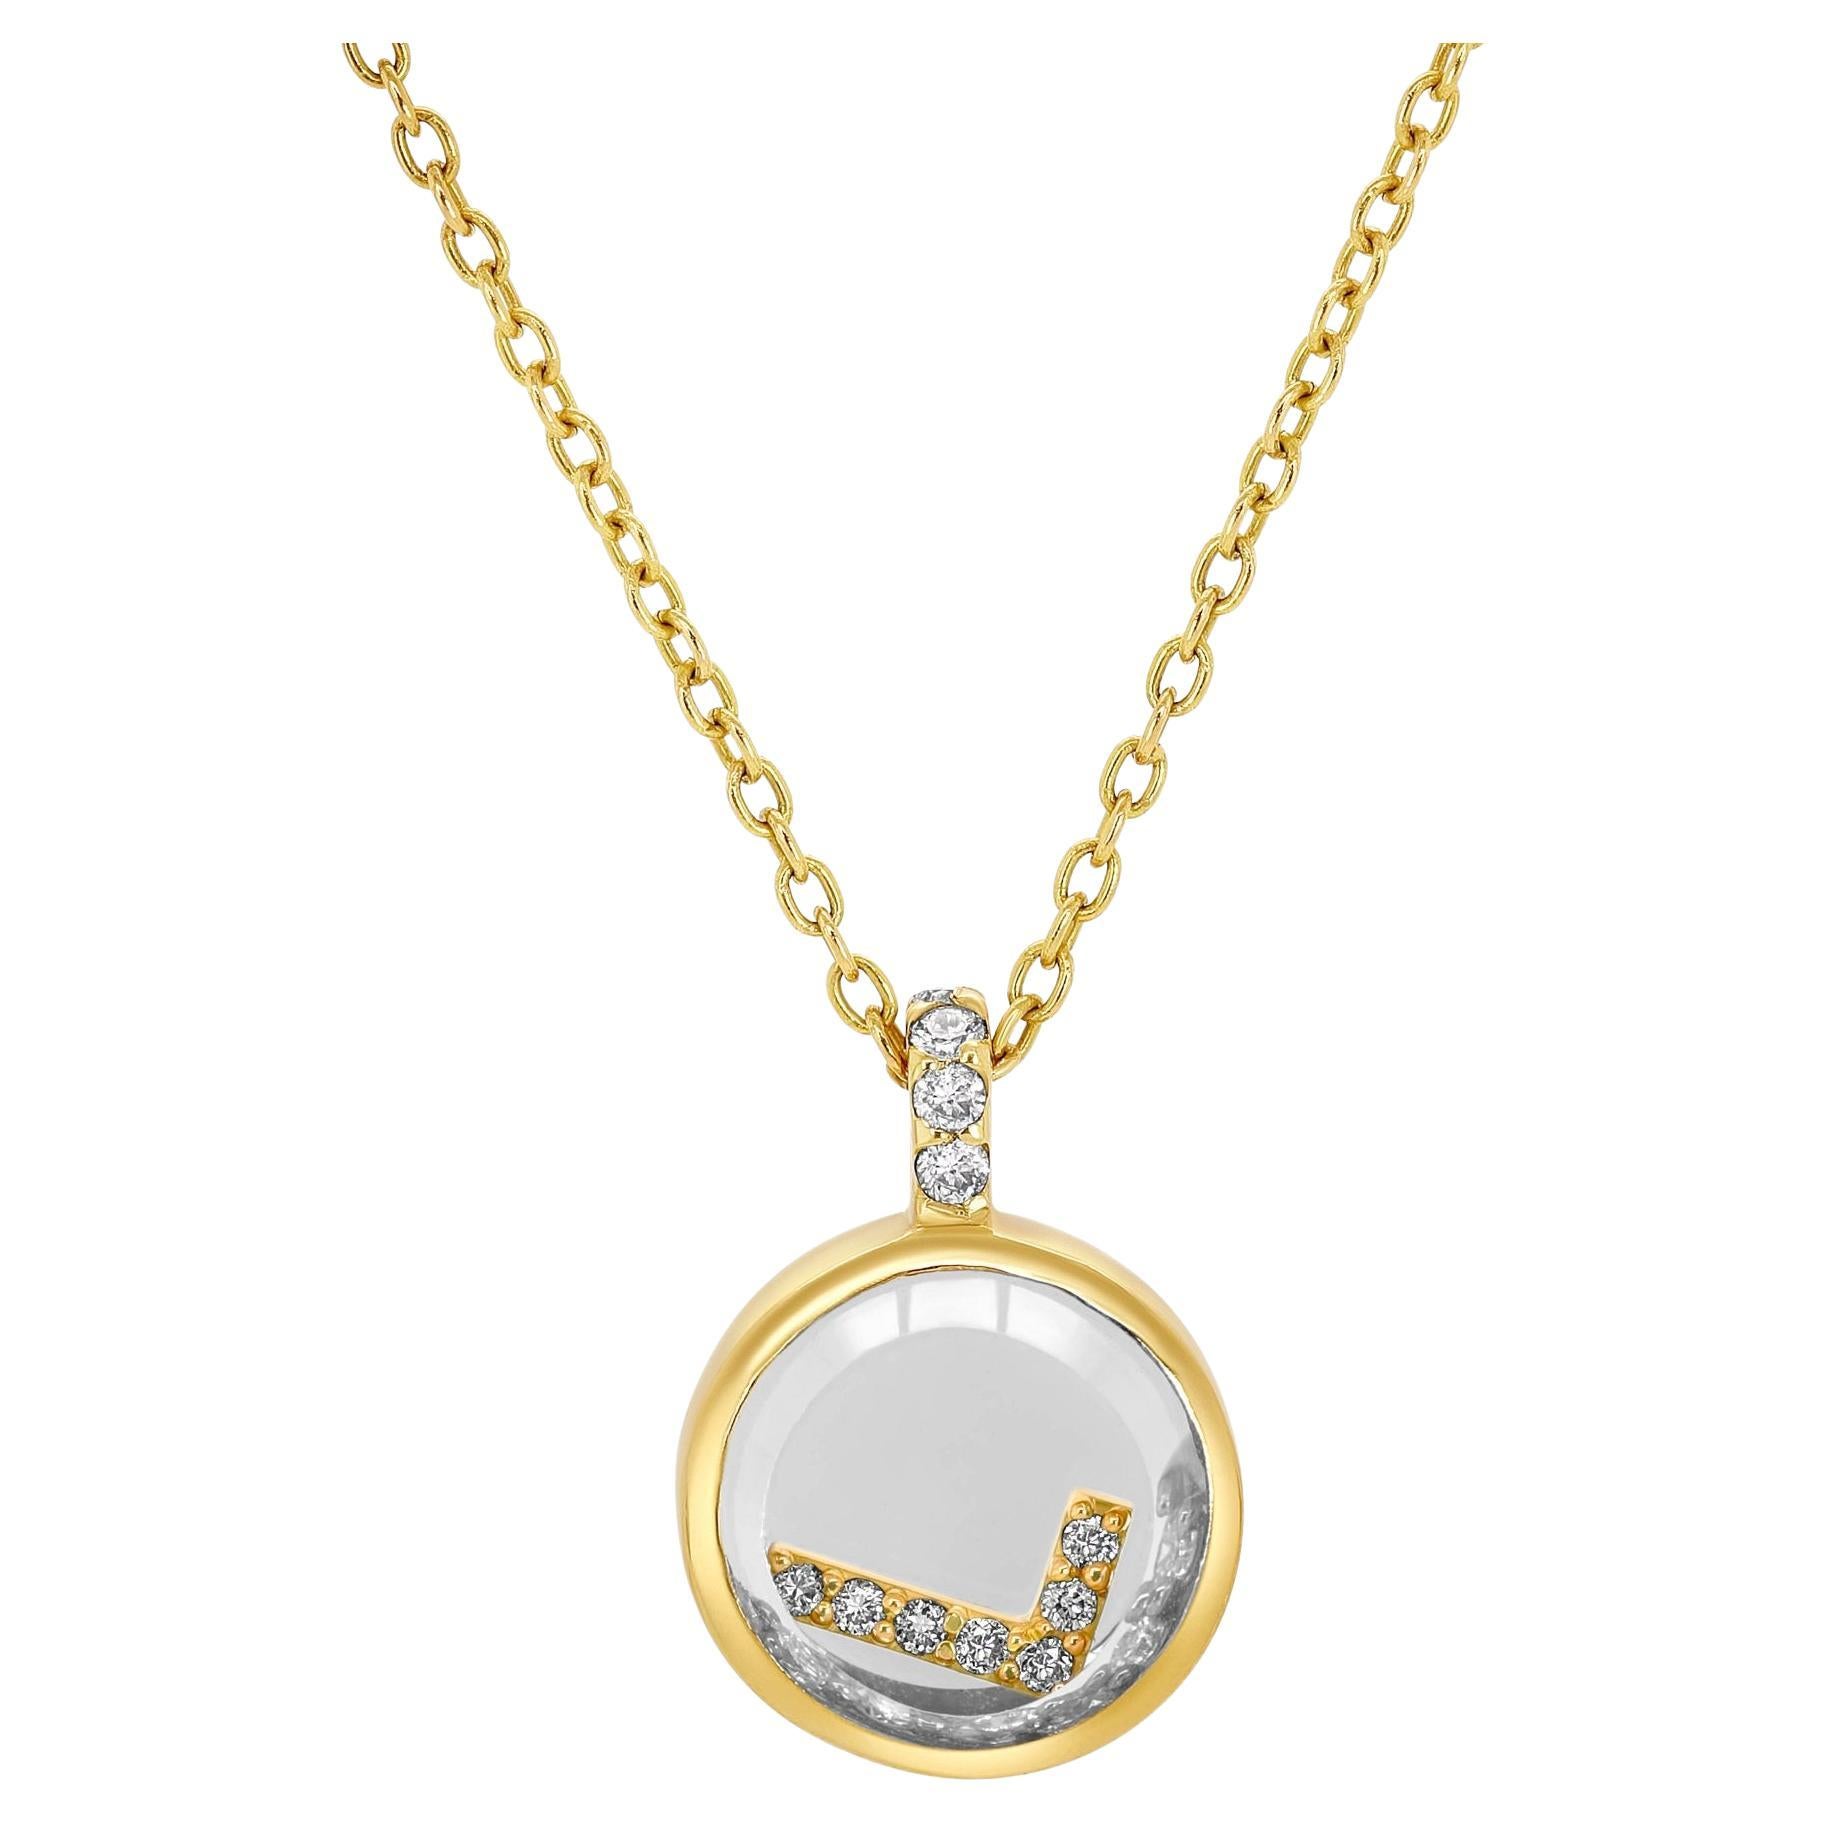 Moritz Glik 18k Yellow Gold Diamond Sapphire Shaker “L” Pendant Necklace with 0.18 Round Brilliant Diamonds set into Sapphire case.
Sapphire case measures to approx. 7.84mm in diameter and 14.33mm long with diamond loop.
The Cable link chain is 16